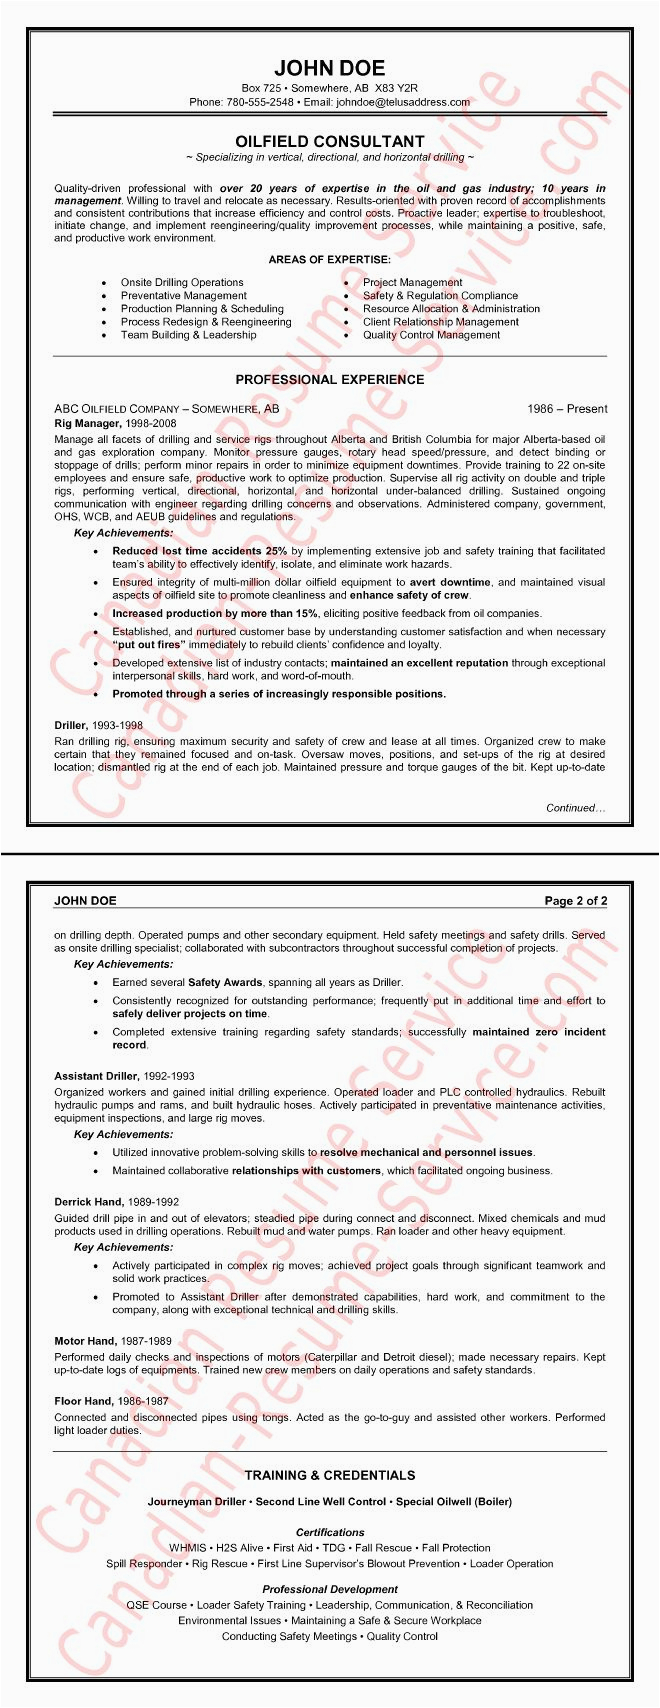 Oil and Gas Consultant Resume Sample Oil Field Resume Examples Awesome Example A Oilfield